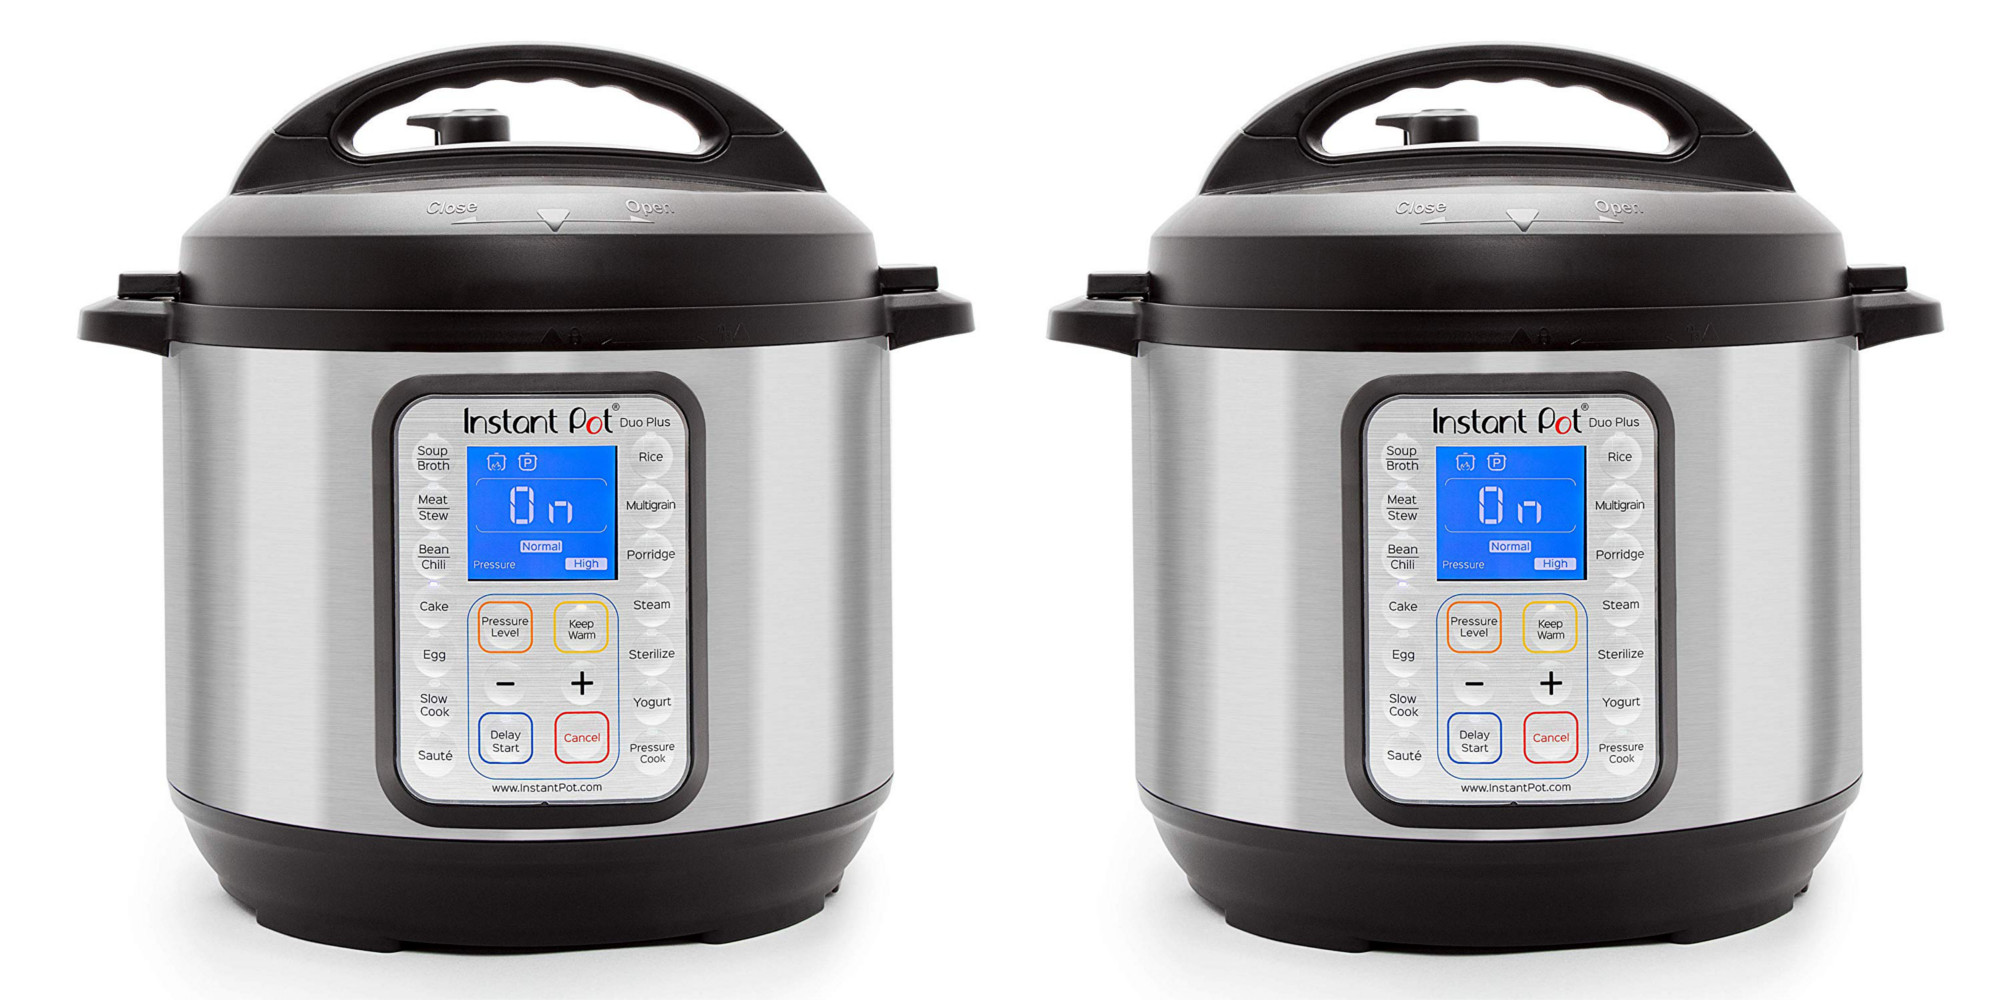 https://9to5toys.com/wp-content/uploads/sites/5/2019/07/Instant-Pot-DUO-Plus-60-6-Quart-9-in-1-Multi-Use-Programmable-Pressure-Cooker.jpg